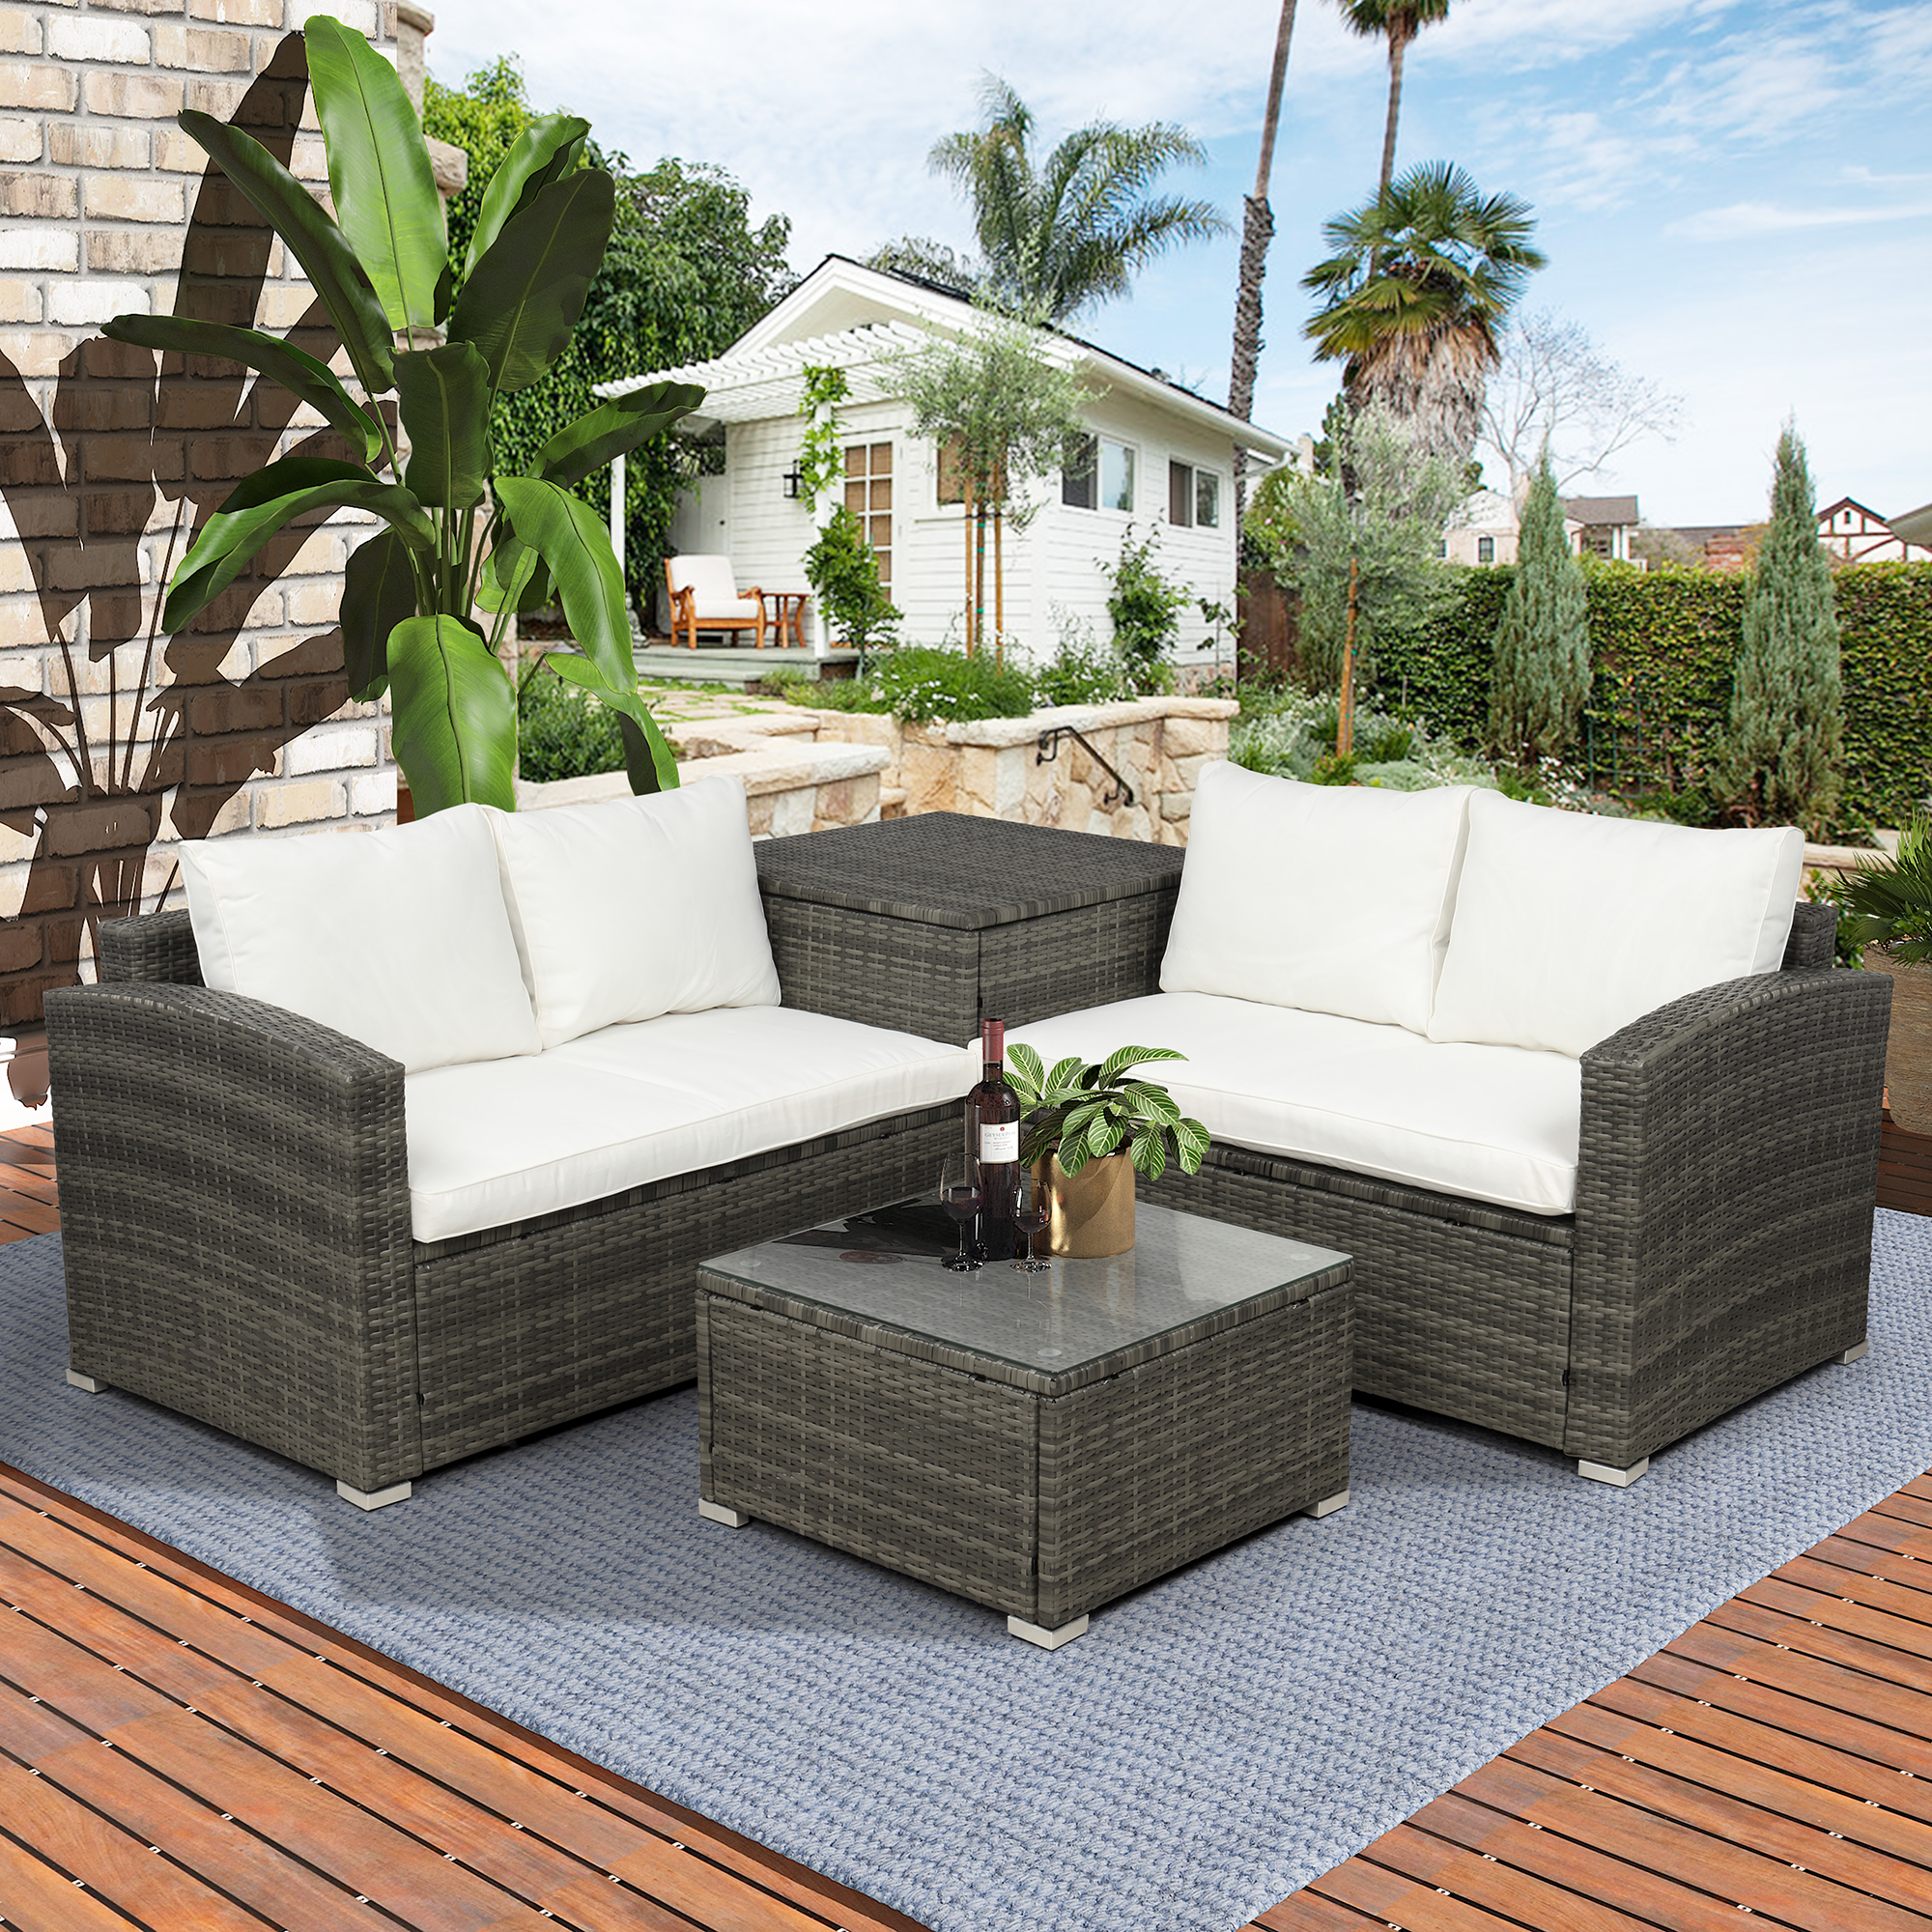 Outdoor Patio Deck Table and Chairs Sets, 4-Piece Wicker Sofa Patio Conversation Furniture Set w/ L-Seats Sofa, R-Seats Sofa, Cushion box, Tempered Glass Dining Table, Padded Cushions, Beige, S13115 - image 2 of 7